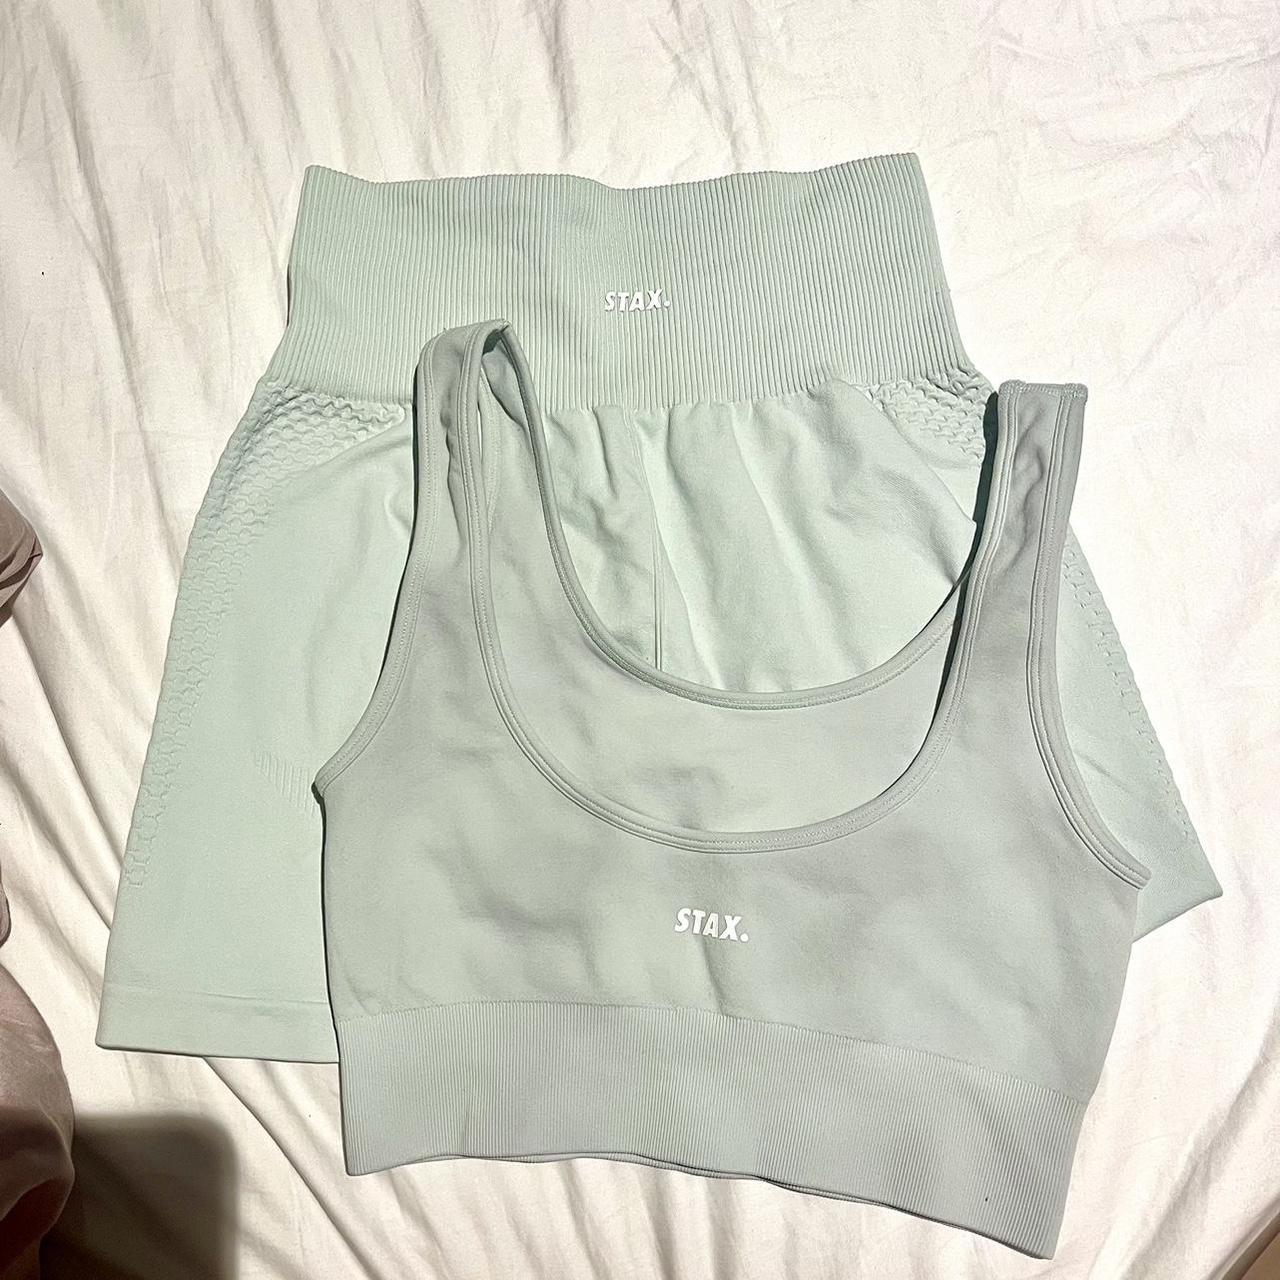 STAX Premium Seamless V6 Cropped tee and Full Length - Depop